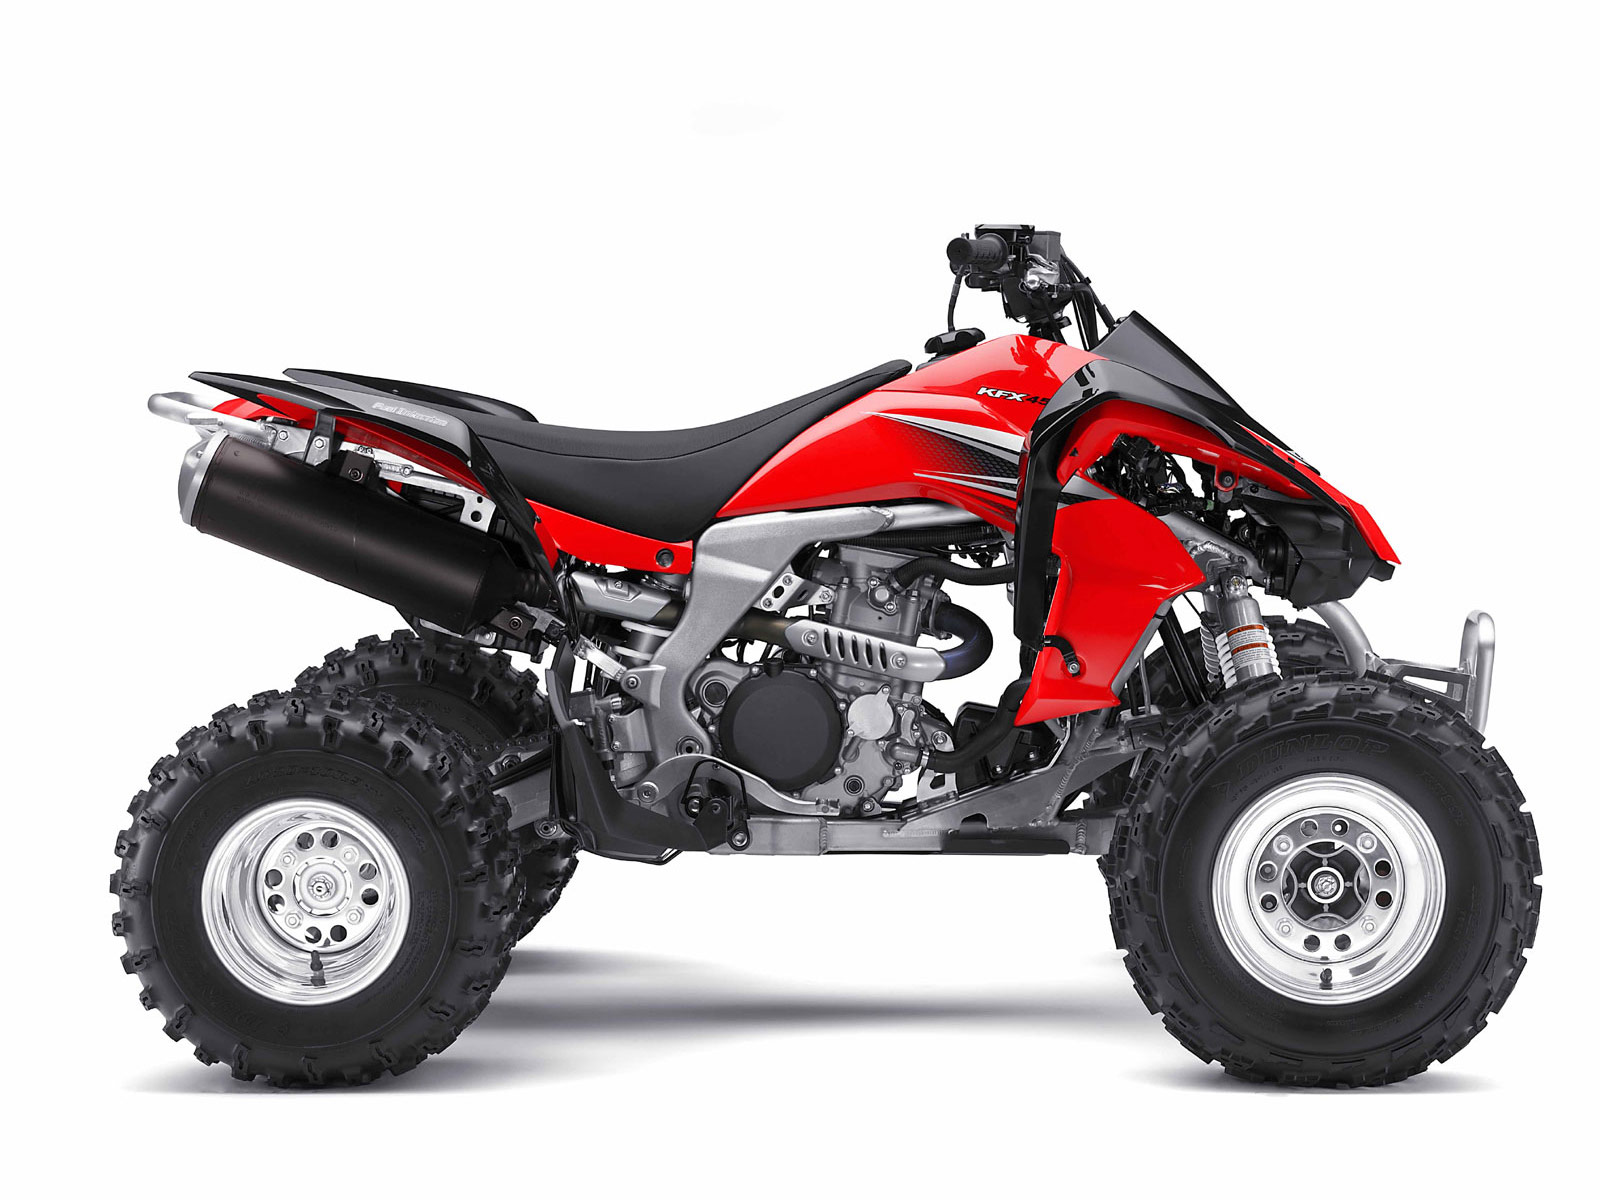 ATV wallpaper, specifications, insurance, dealers, lawyers.